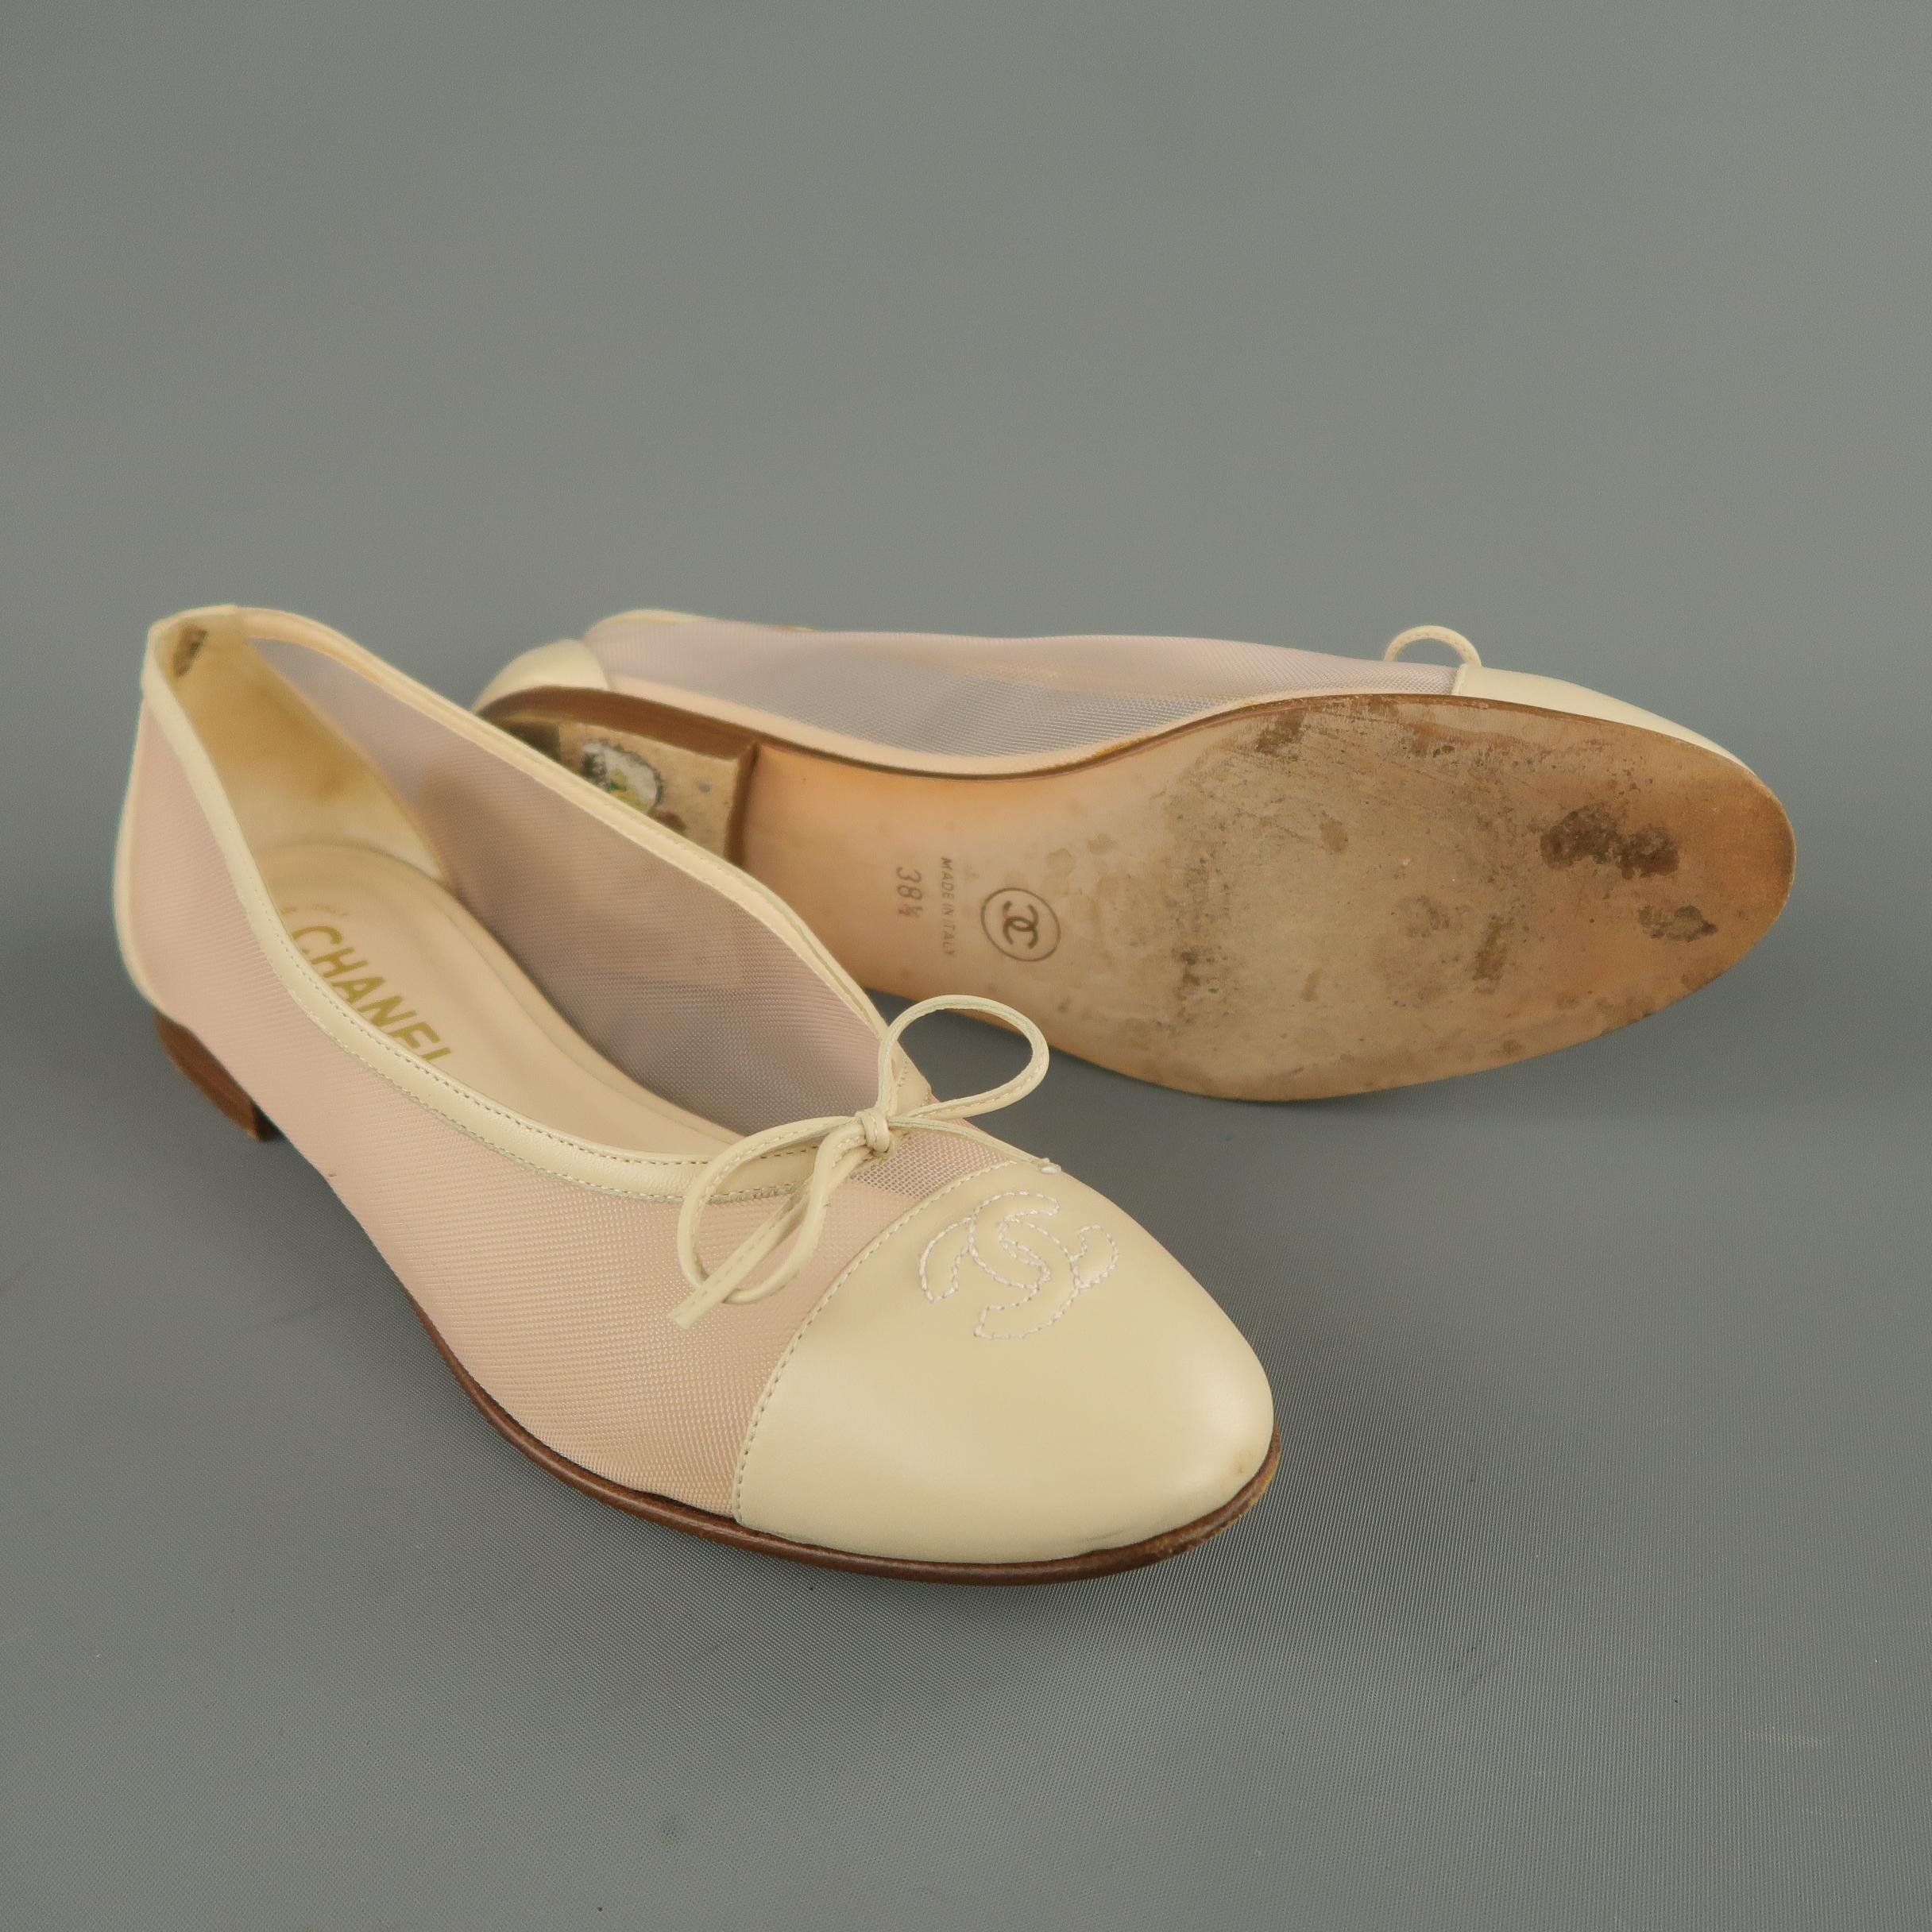 CHANEL Size 8.5 Beige Leather Pink Mesh CC Bow Cap Toe Flats im Zustand „Gut“ in San Francisco, CA